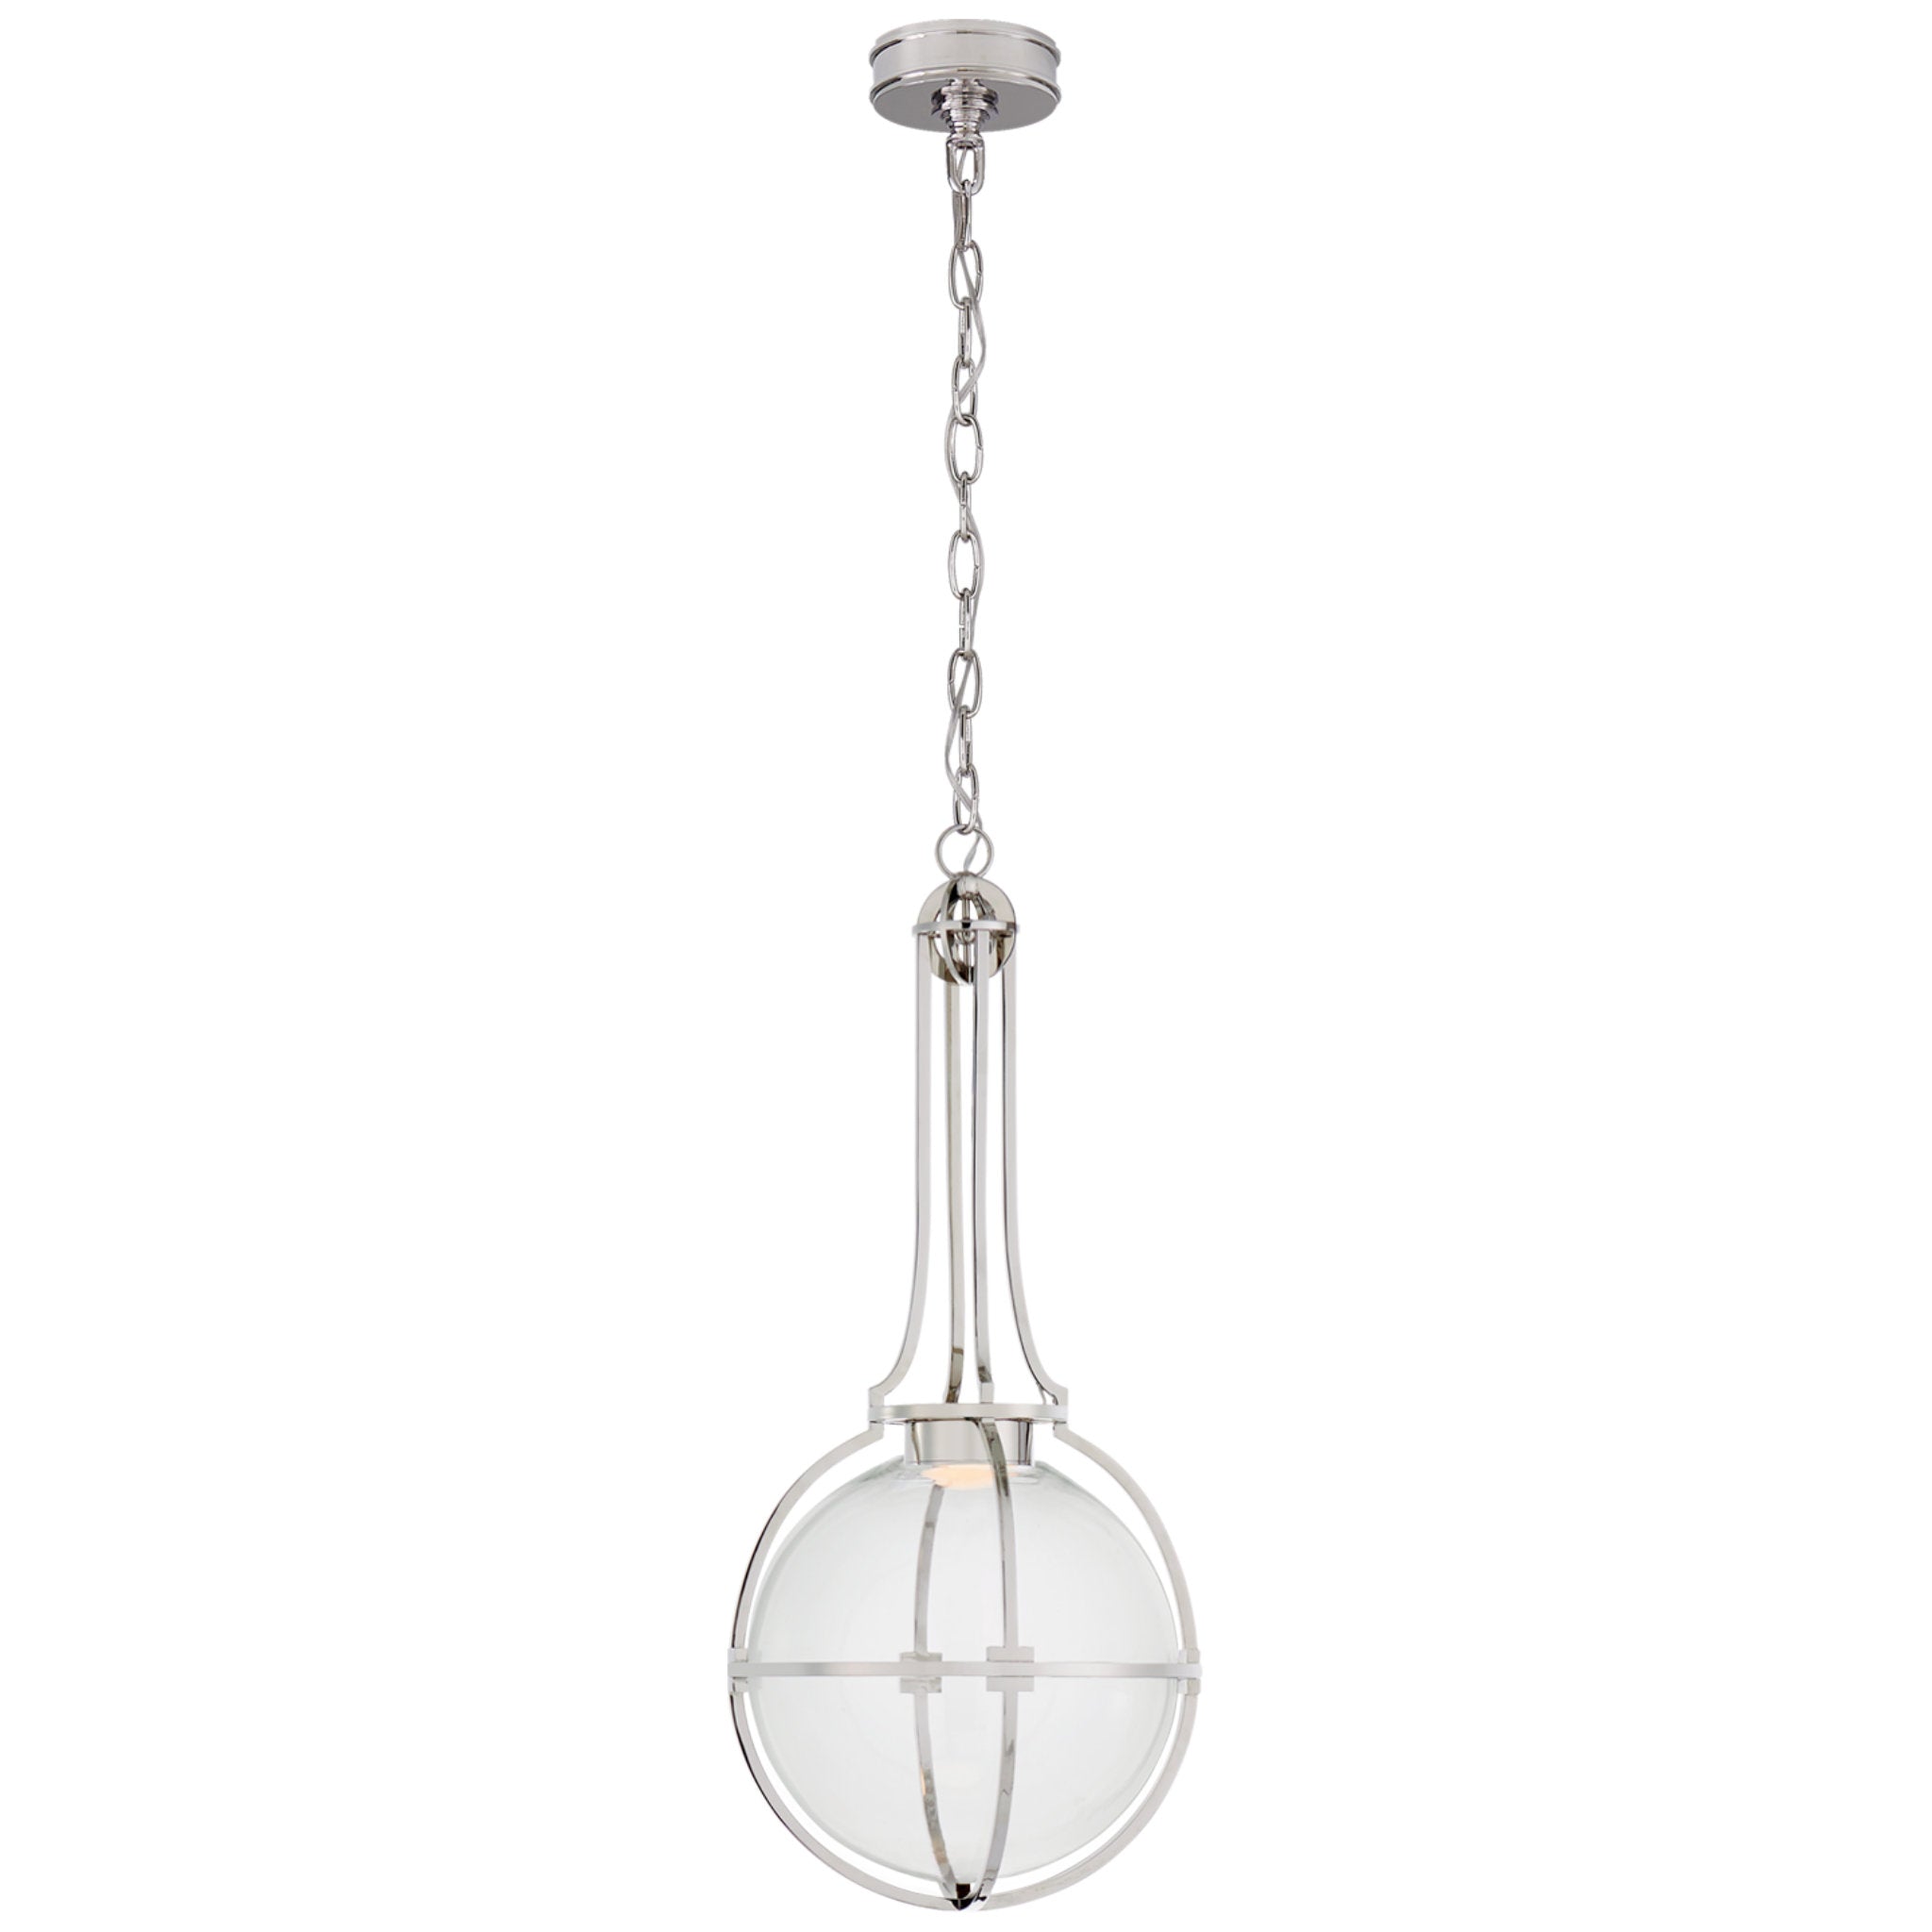 Chapman & Myers Gracie Medium Captured Globe Pendant in Polished Nickel with Clear Glass